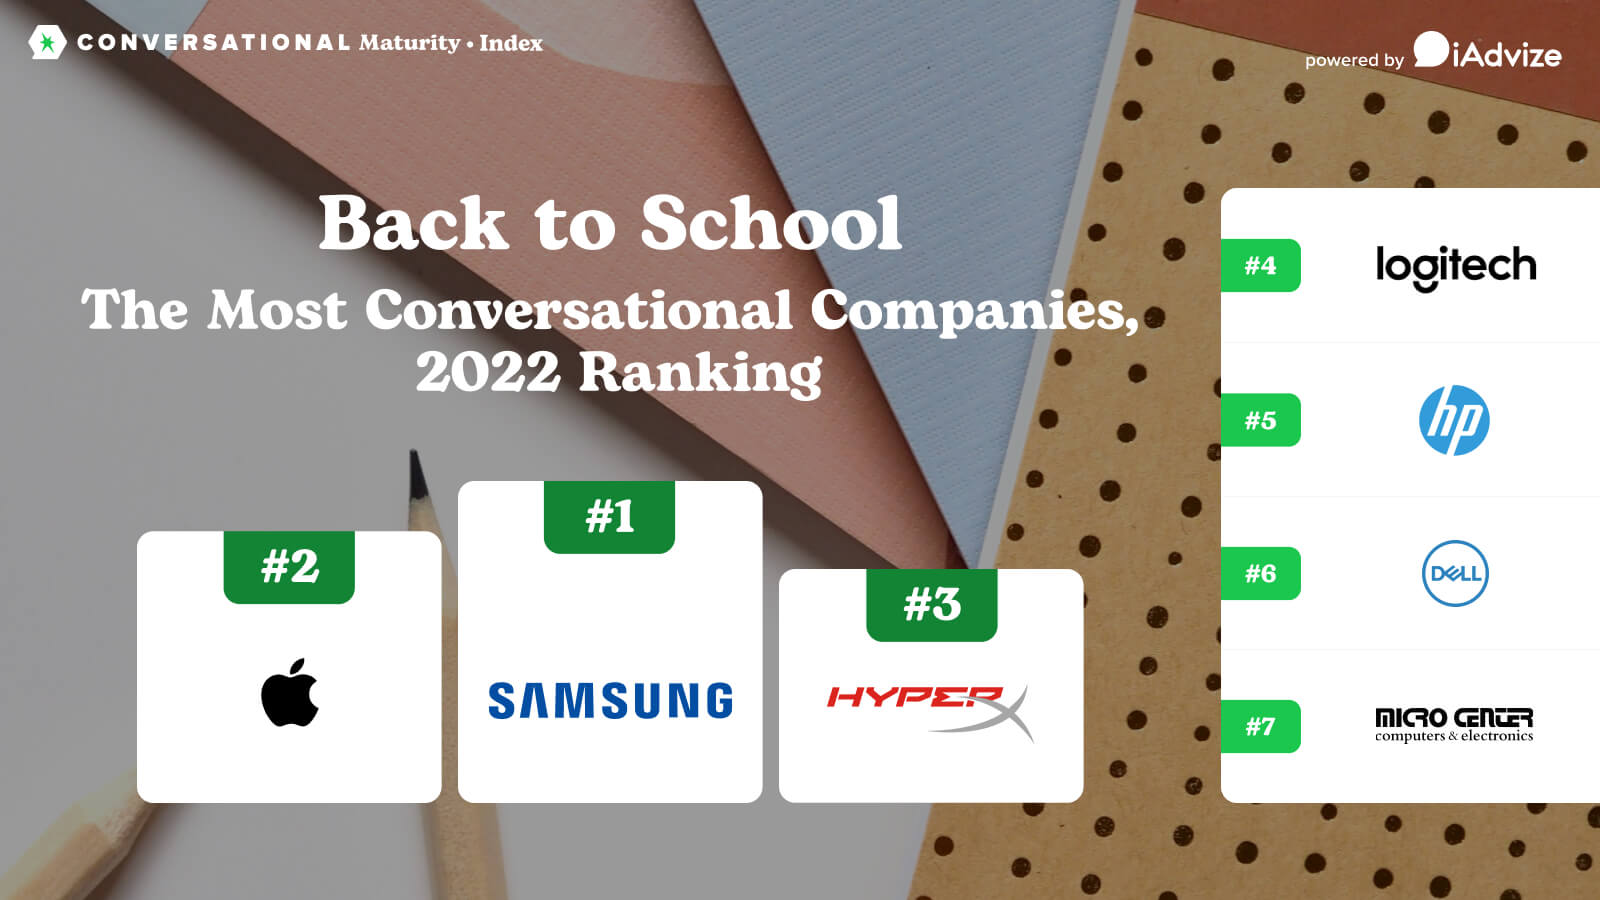  Featured image: Conversational maturity index for back to school companies  - Read full post: Conversational Maturity Index: Back to School Companies 2022 Ranking